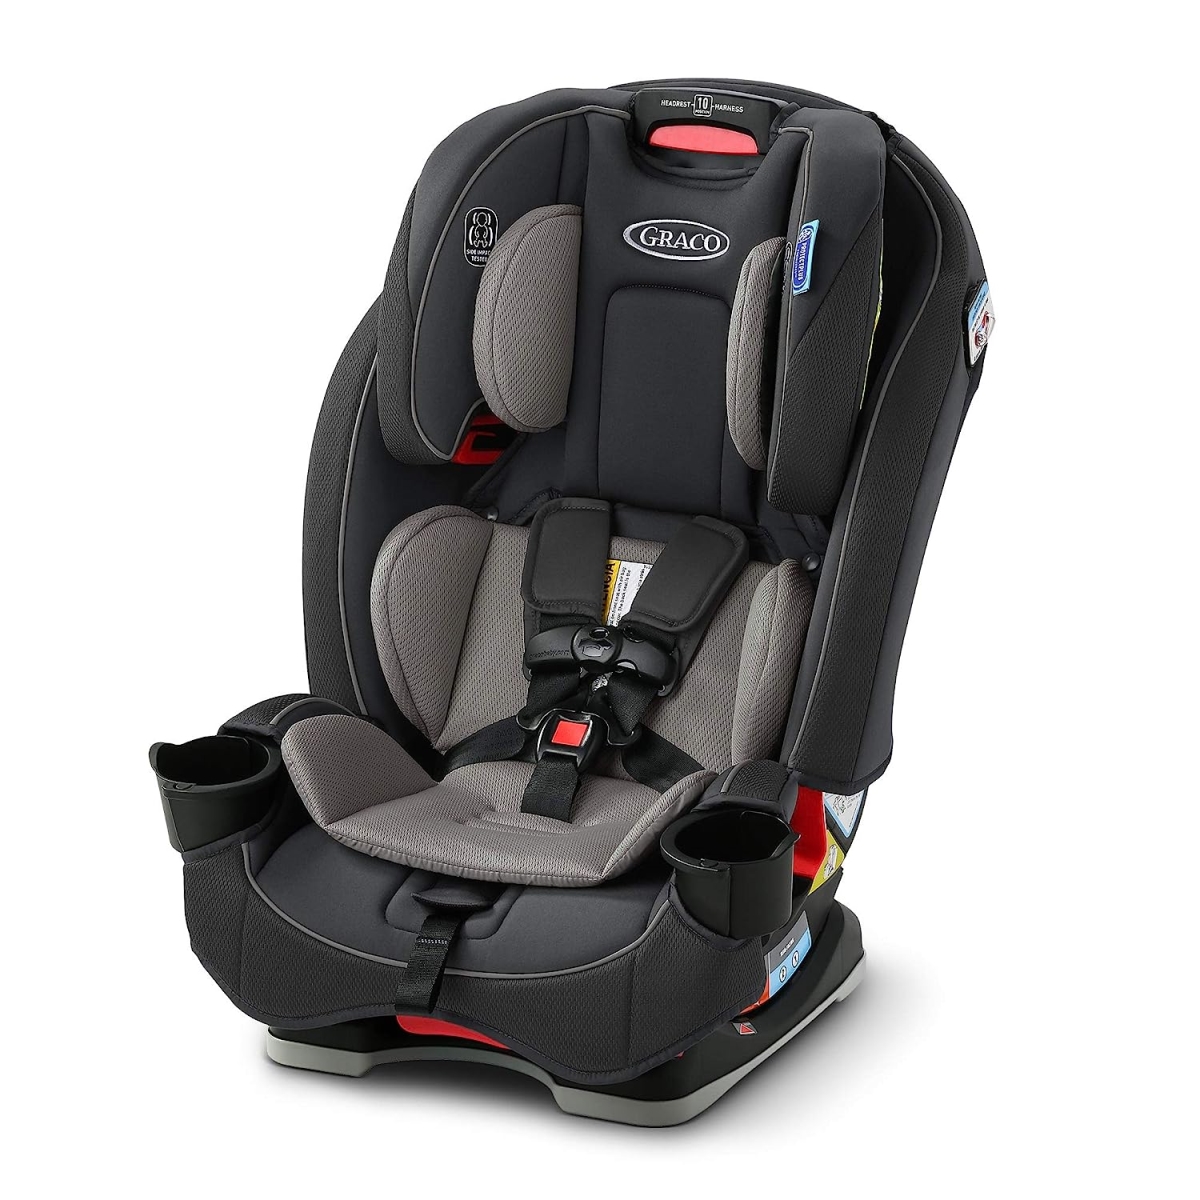 3 in 1 Car Seat  Slimfit 3 in 1 Car Seat | Slim & Comfy Design Saves Space in Your Back Seat, Redmond -  Graco